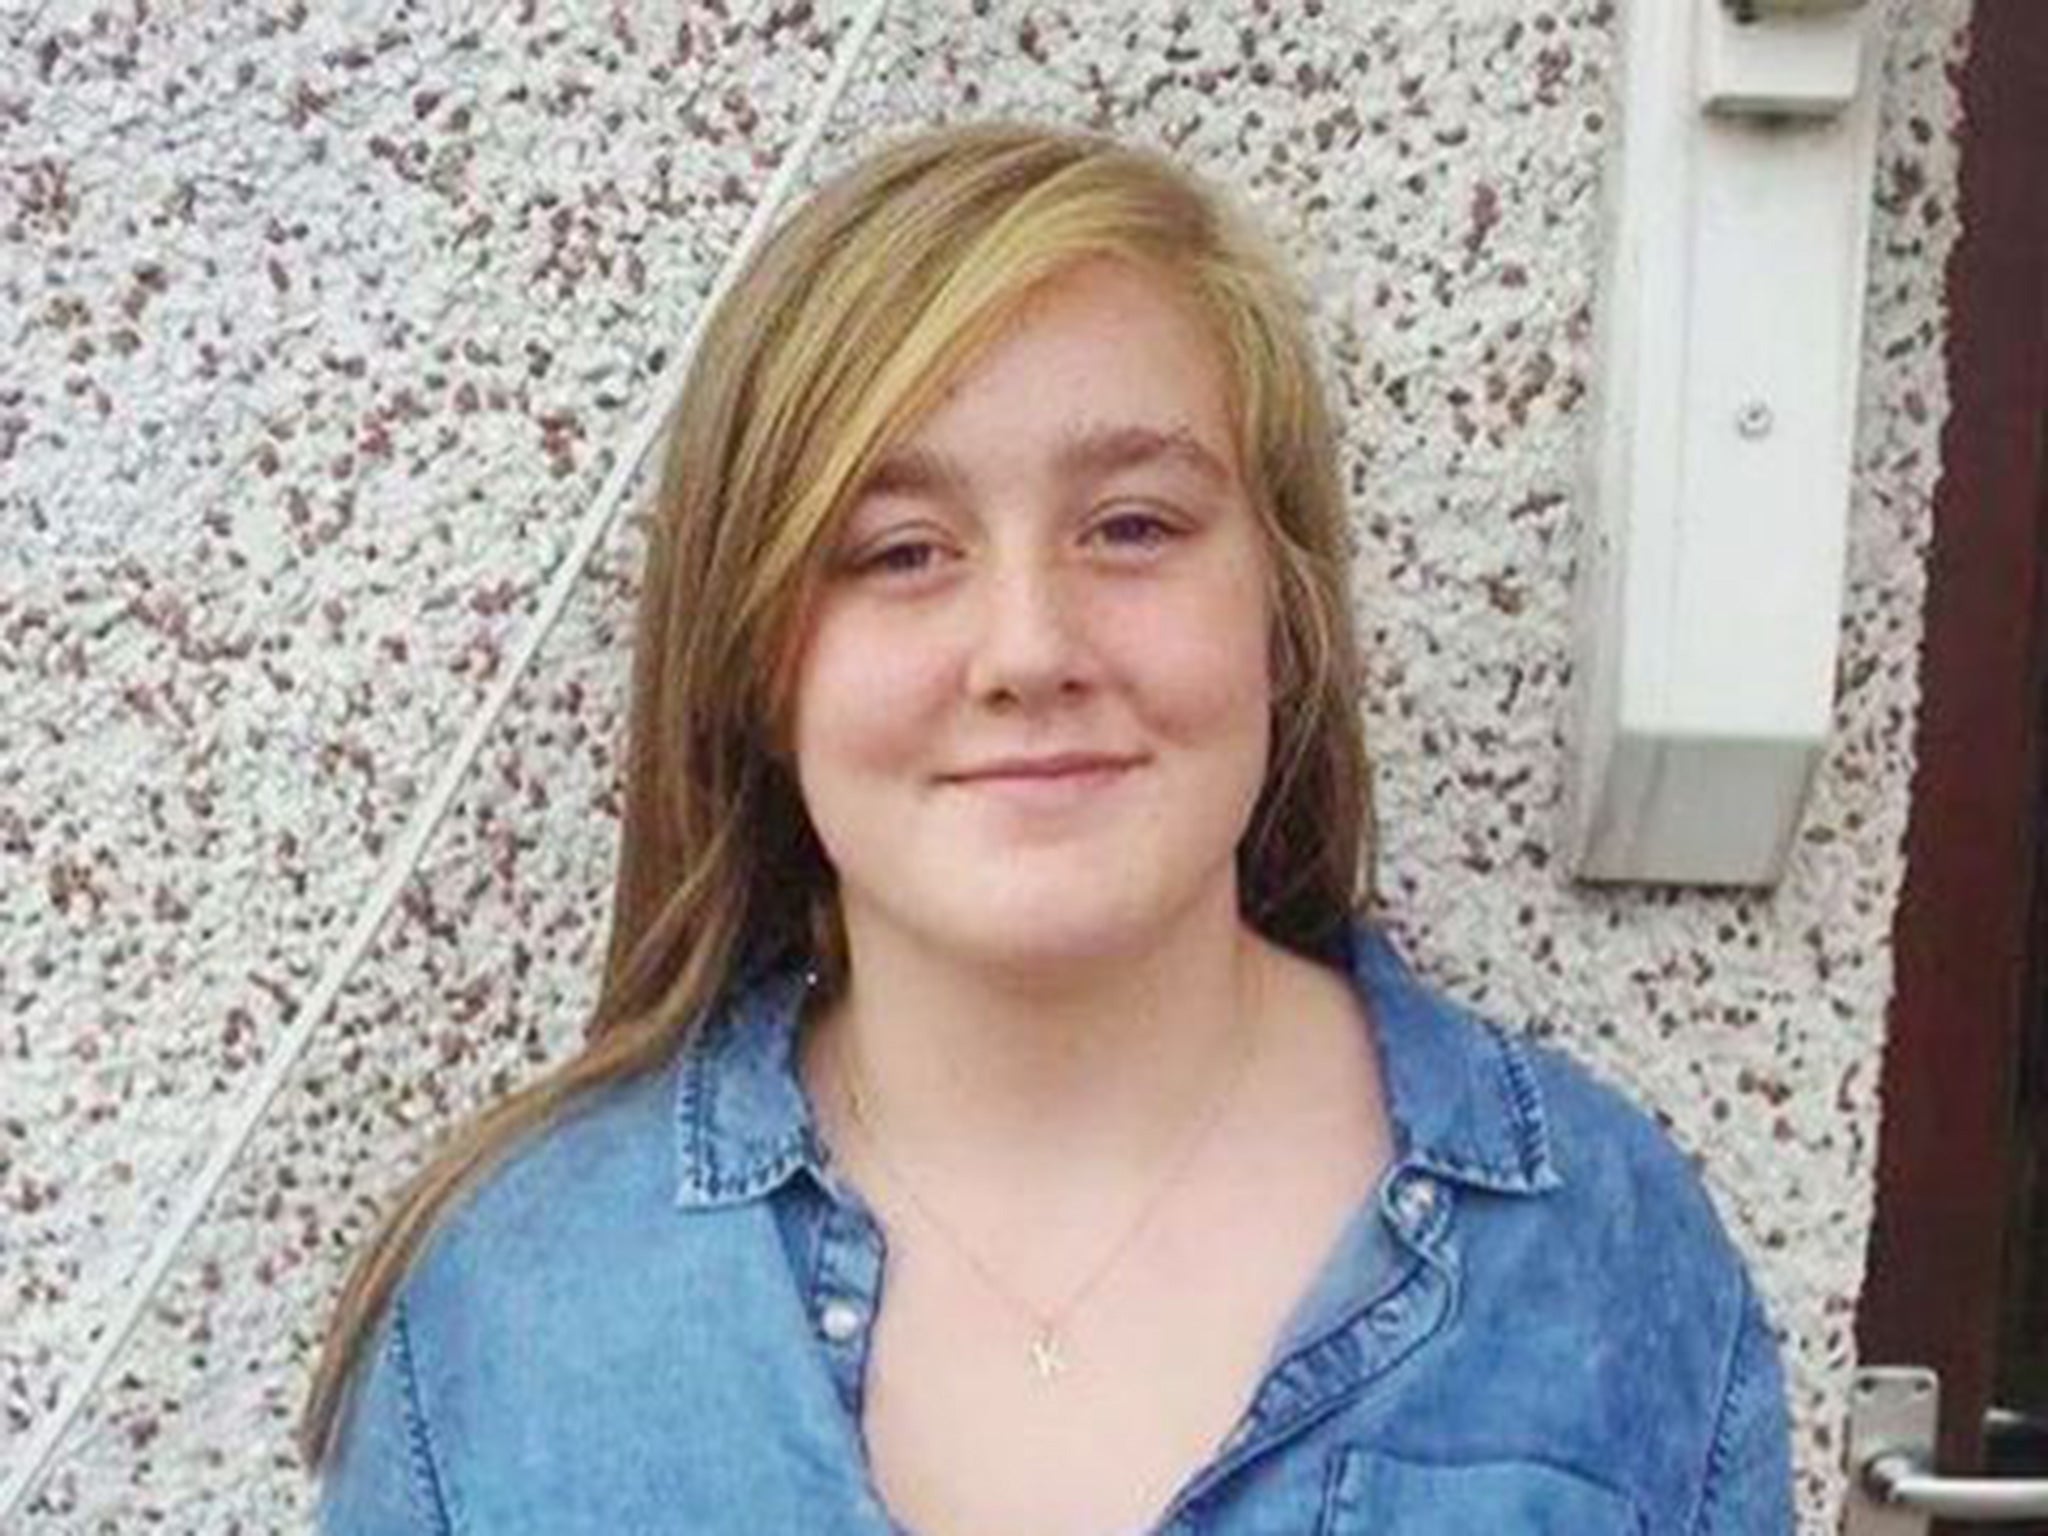 Kayleigh, 15, is described as a 'bubbly, loving, caring' girl by her parents